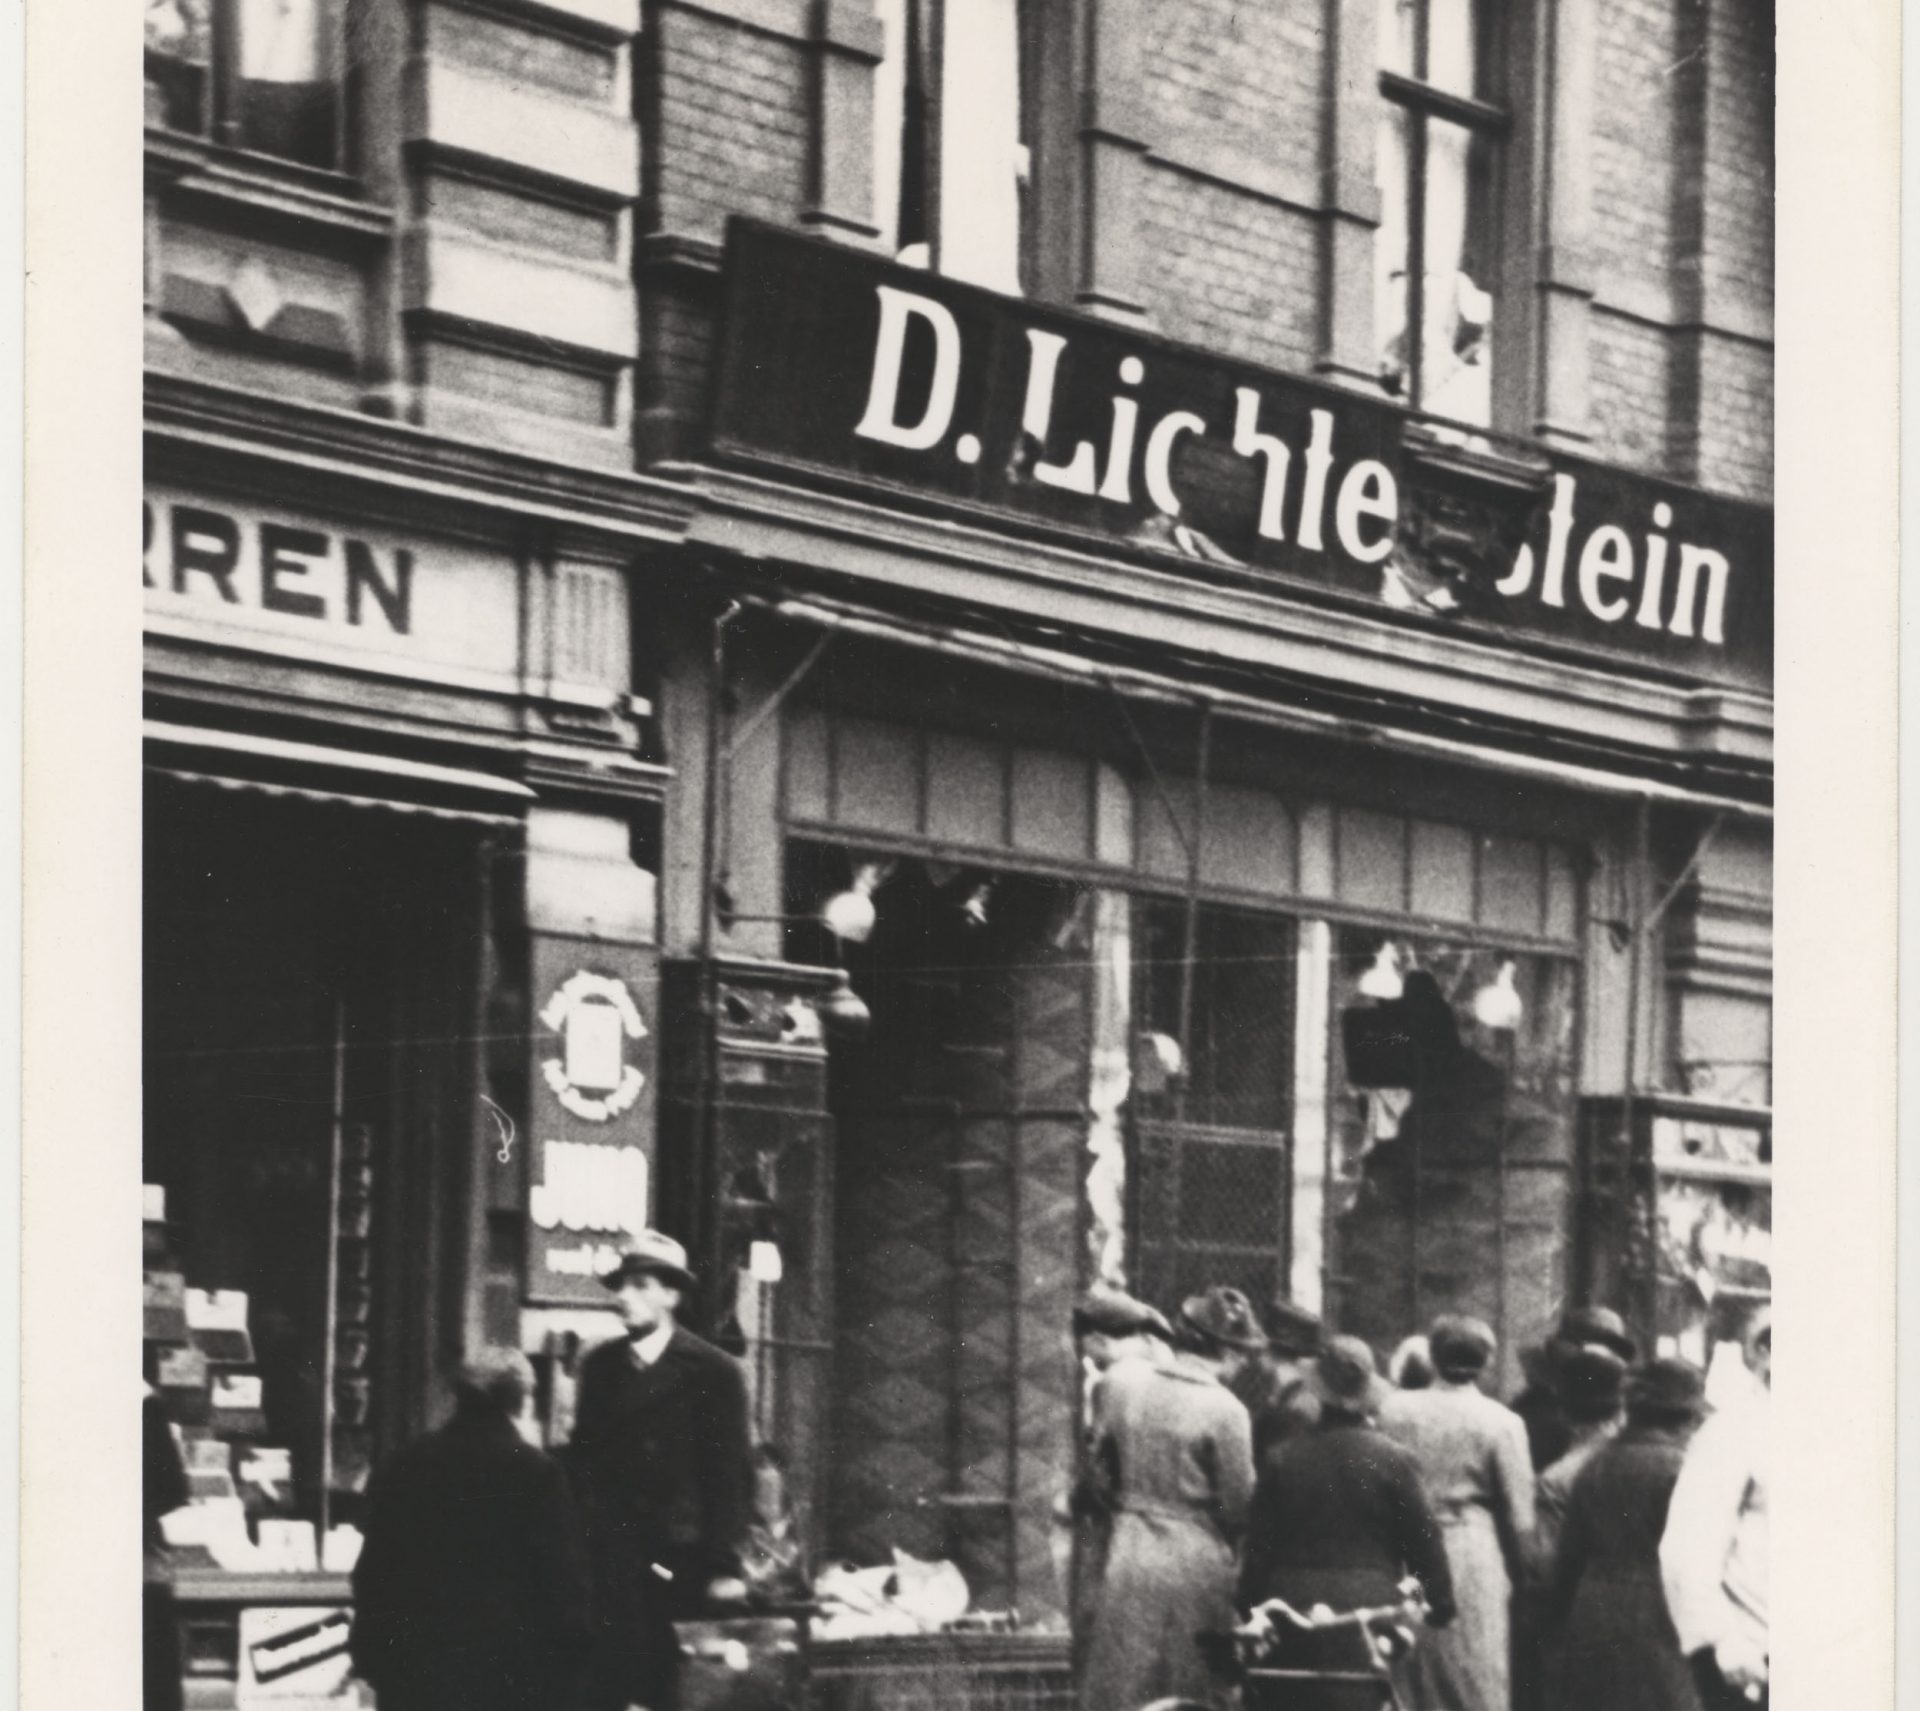 This photograph shows a Jewish storefront that was vandalised during Kristallnacht. People are looking inside the broken window under the name “D. Lichtenstein”.